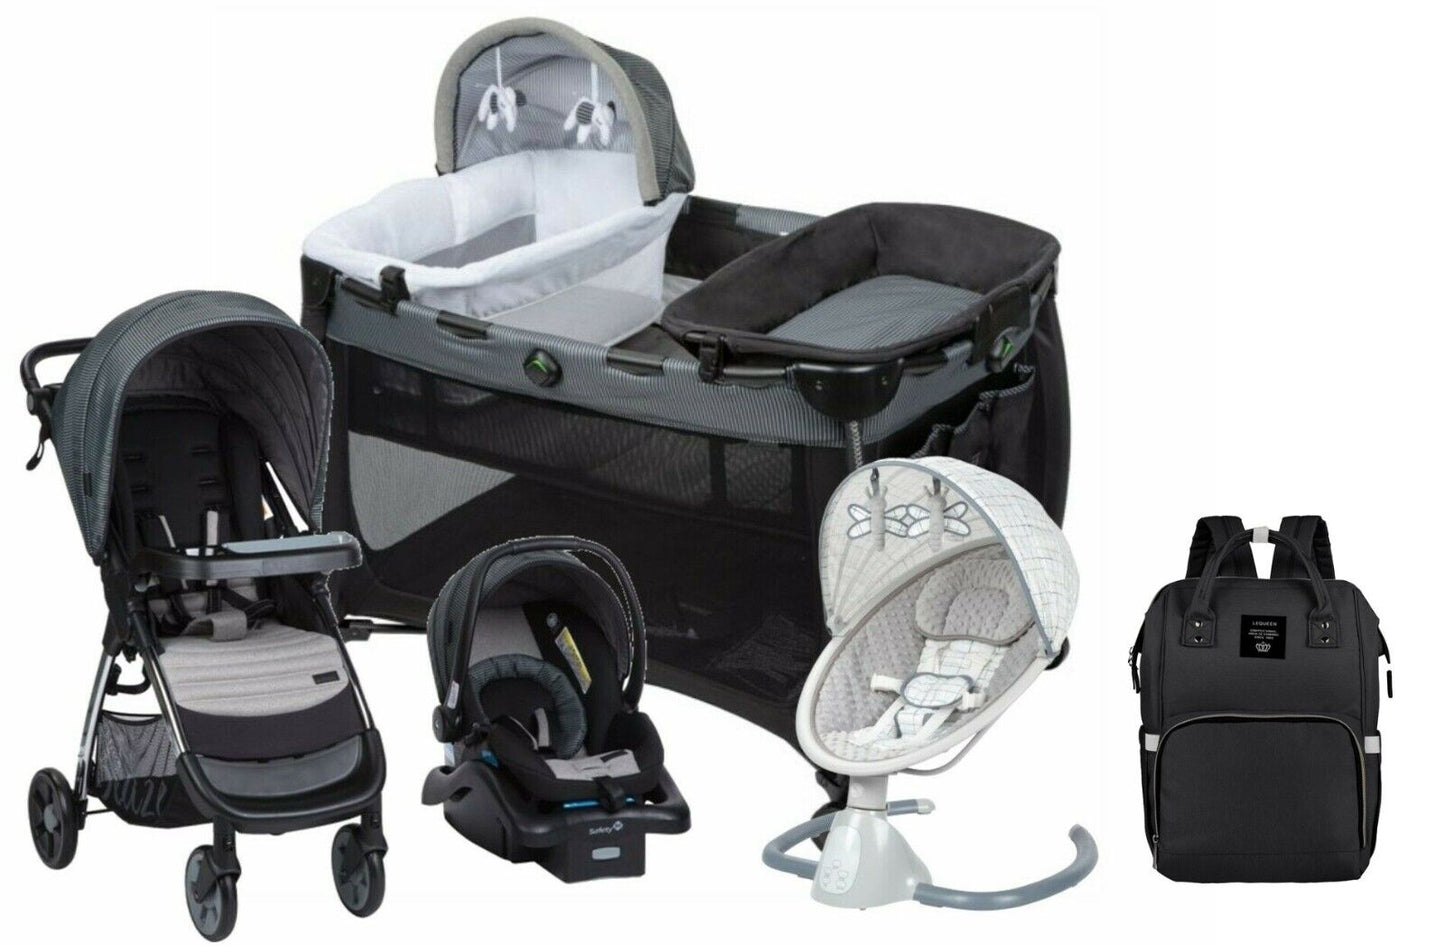 Baby Stroller with Car Seat Playard Bag Swing Travel Transport System Combo